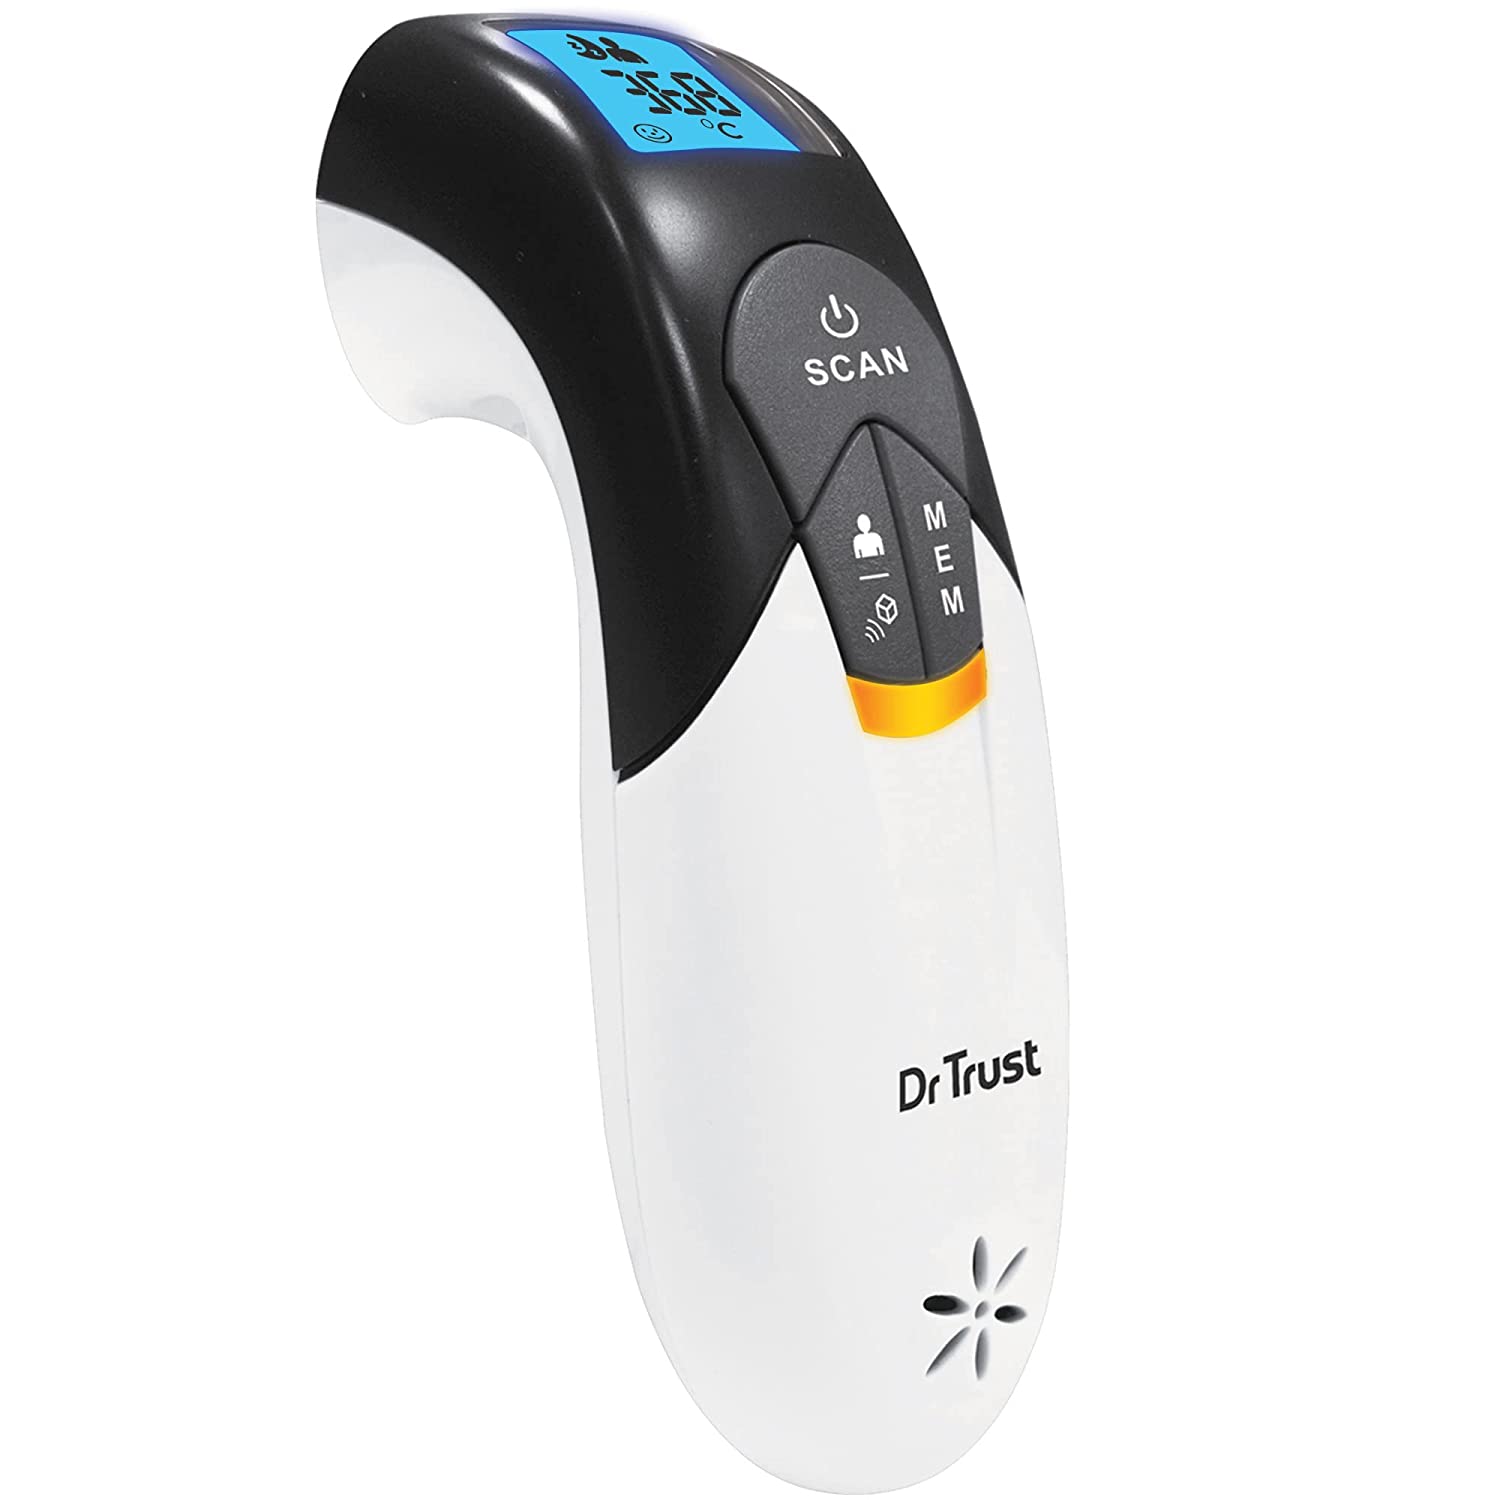 Dr-Trust-USA-Clinical-Digital-Non-Contact-Infrared-Forehead-Thermometer-for-Fever-Body-Temperature.jpg